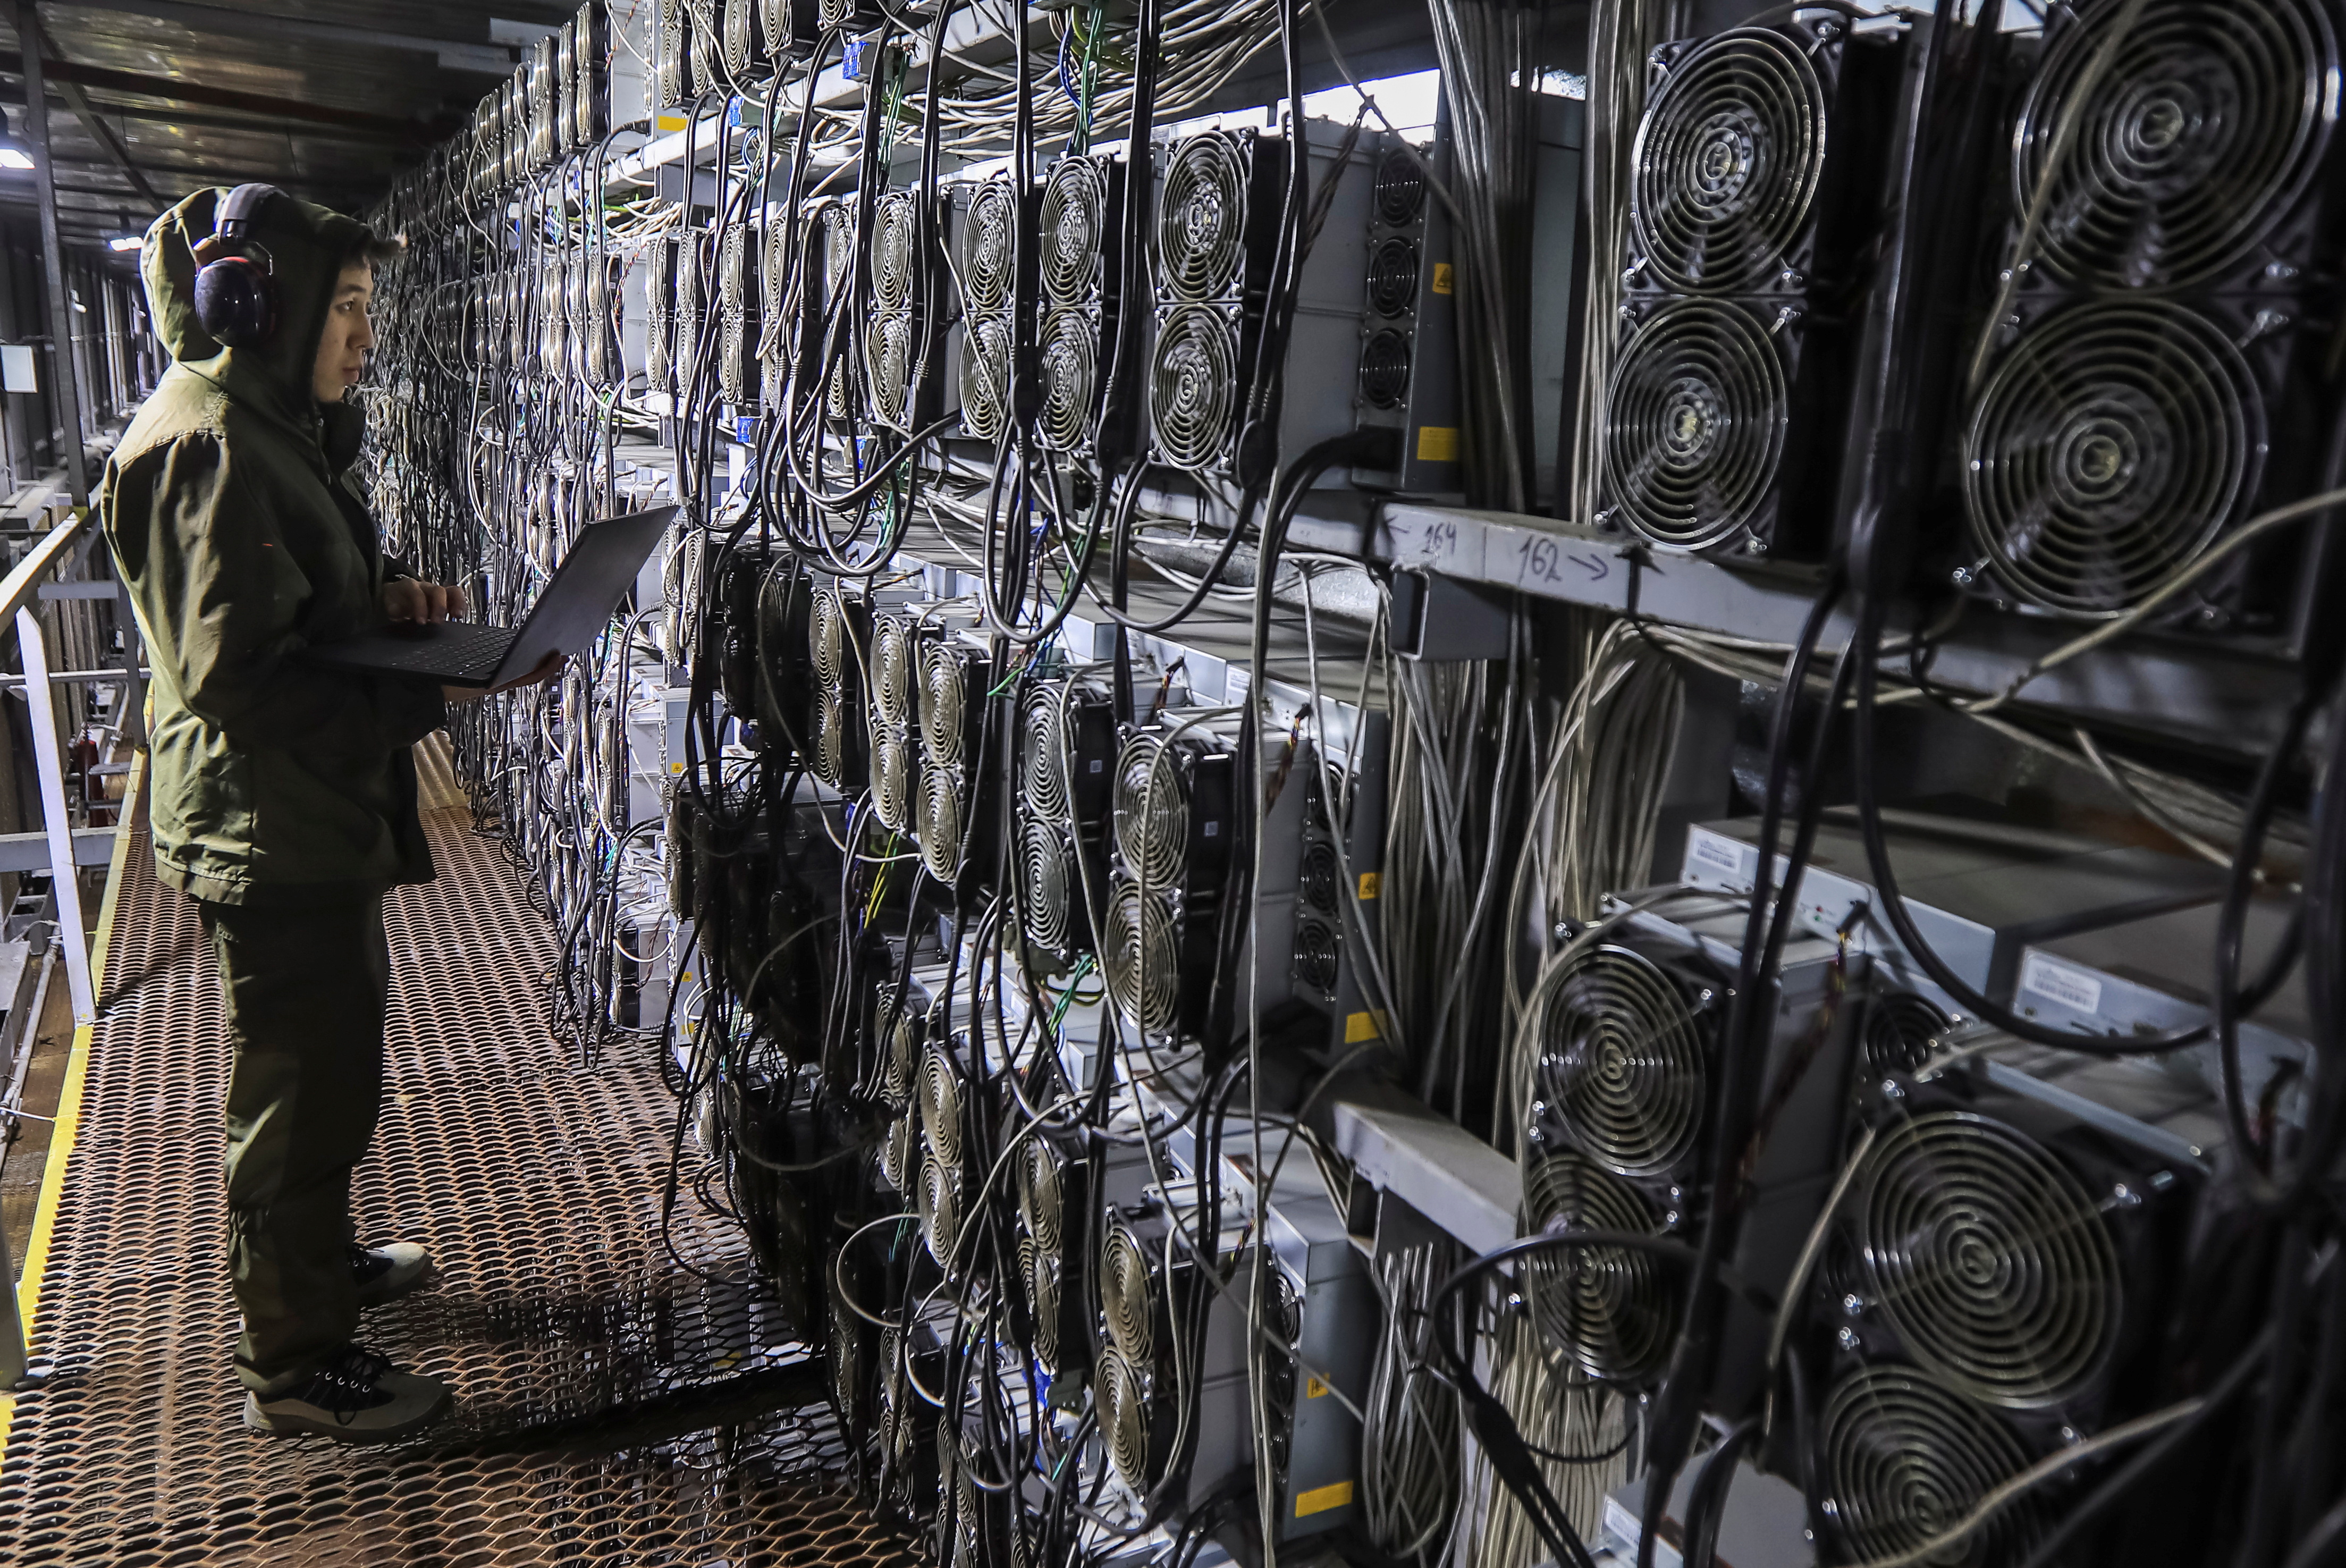 The Basics of Cryptocurrency Mining, Explained in Plain English   The  Motley Fool